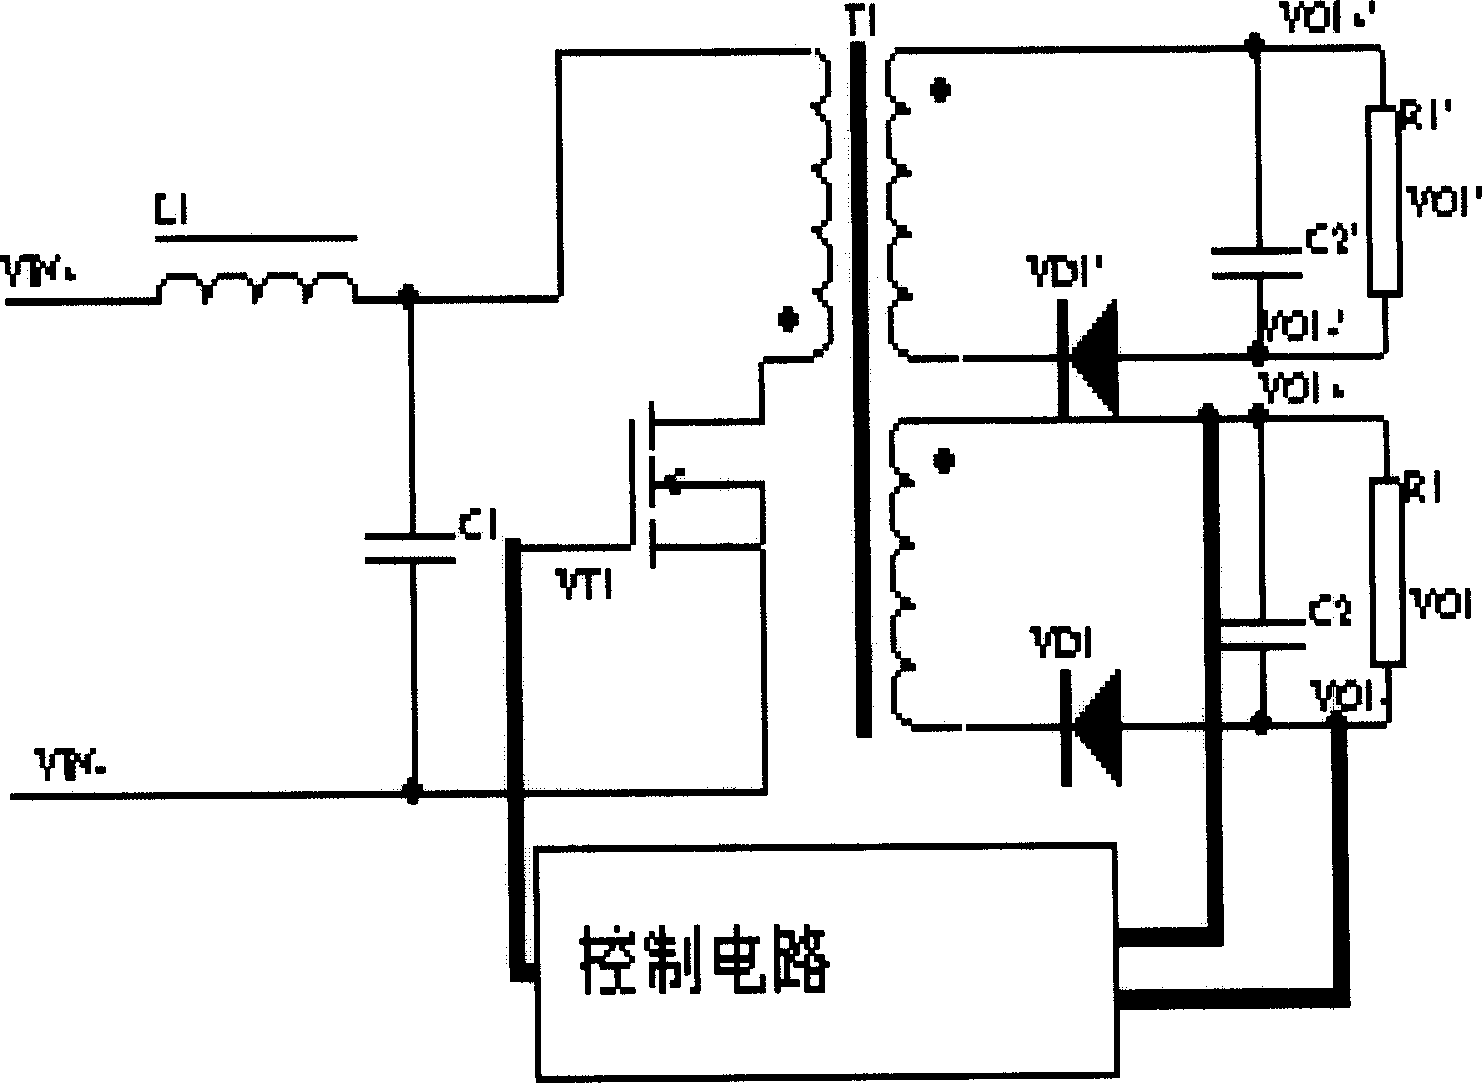 Circuit for raising unbalance of multi-output power source loads